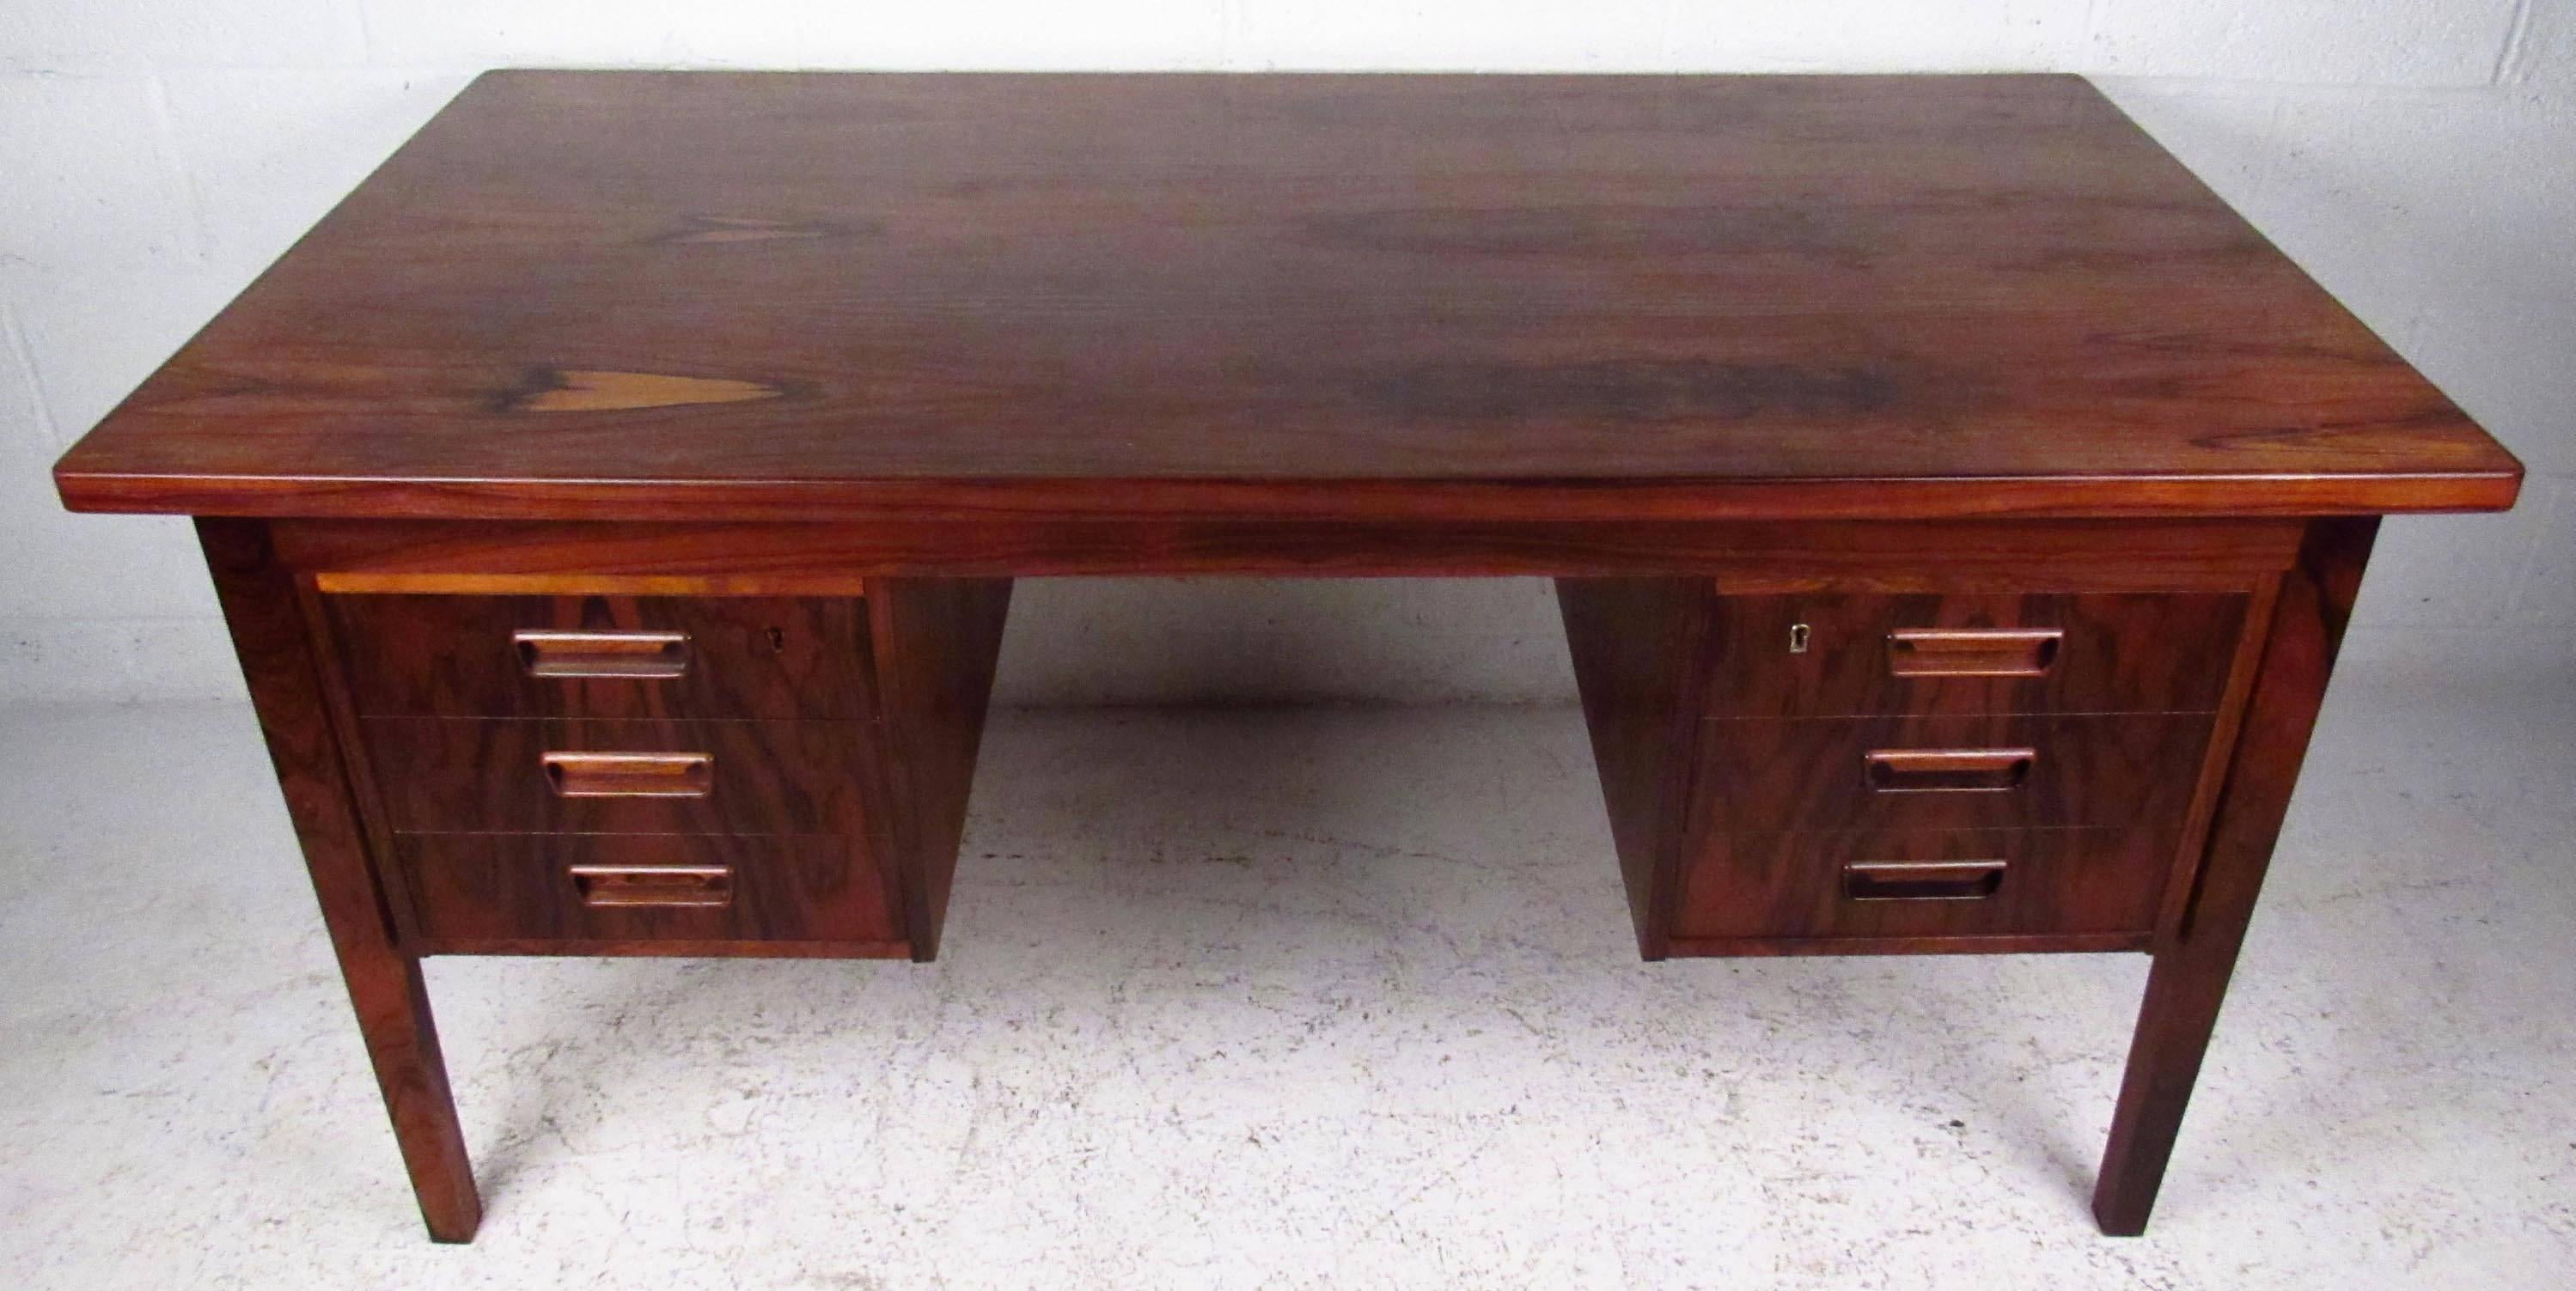 Vintage modern desk, features beautiful rosewood grain, finished back and six drawers with sculpted handles.

Please confirm item location NY or NJ with dealer.